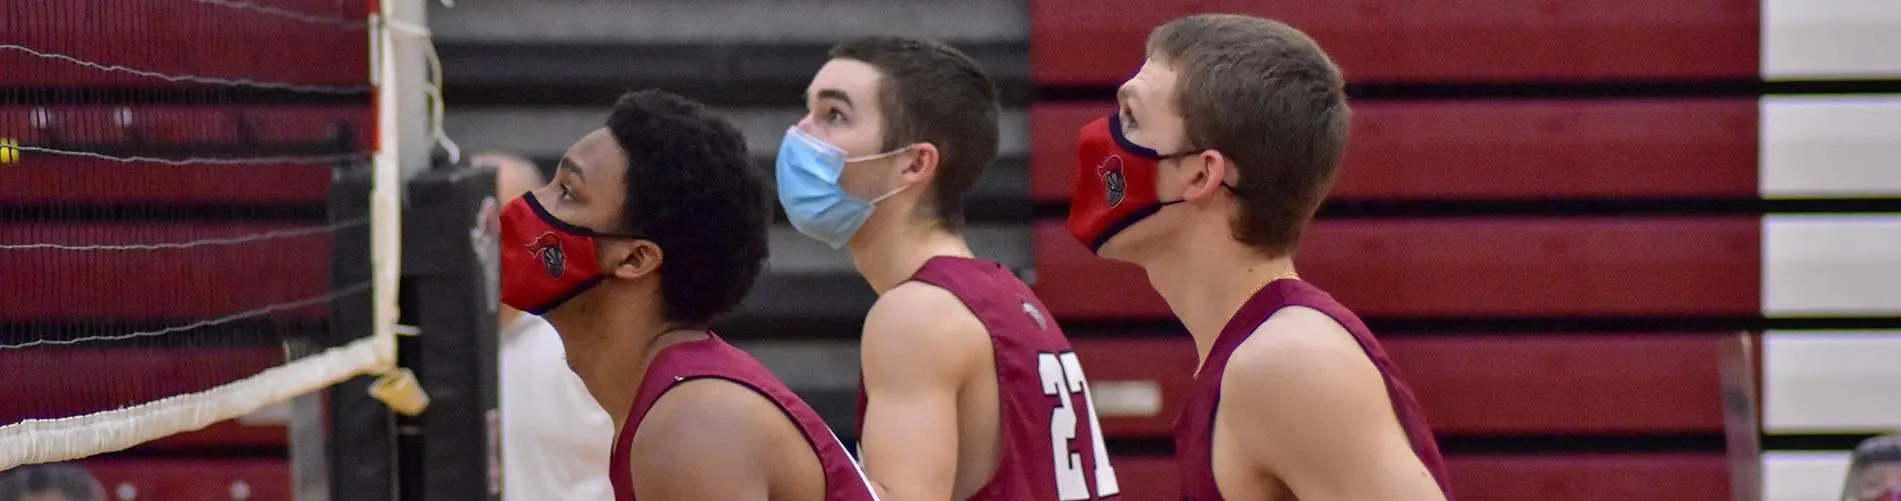 Men's Volleyball players return to the court wearing masks after COVID-19 shutdowns halted athletic events around the world